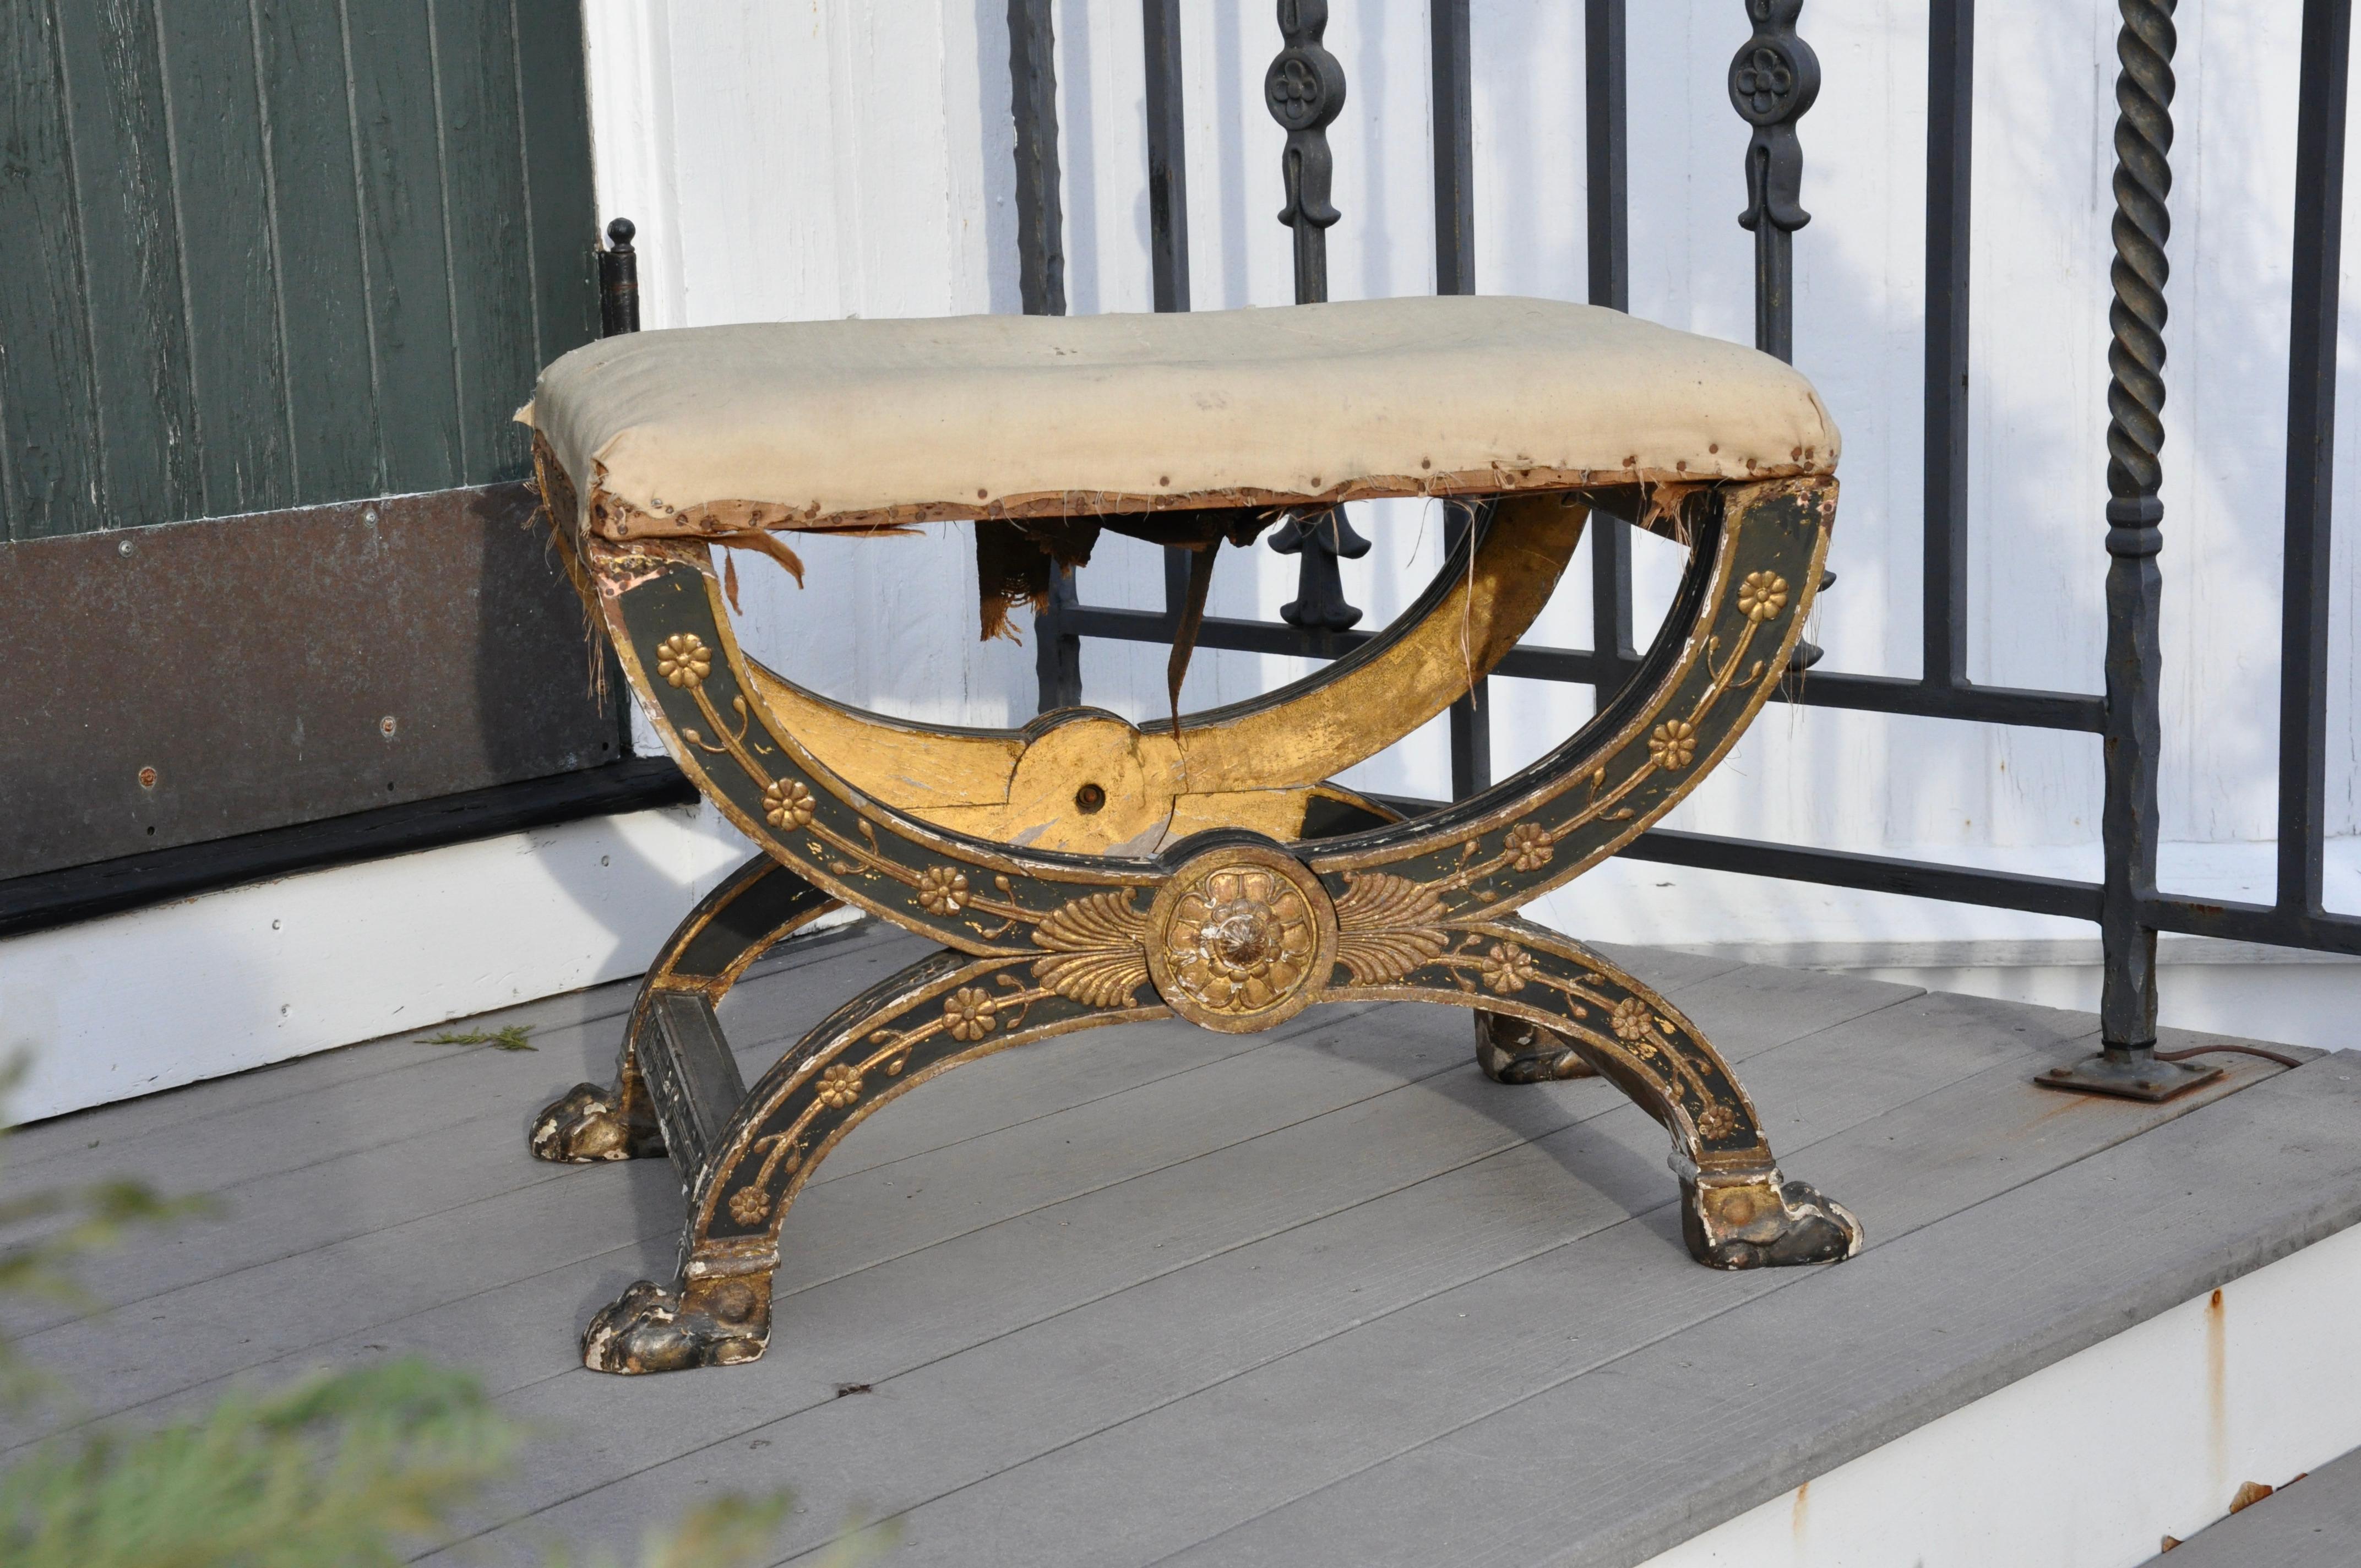 Period French Empire Tabouret or Ployant Ordered for the Tuileries Palace under the Reign of Napoleon Bonaparte. Folding design. Carved and gilded wood. Large scale as they would have served for high ranking members of the Court. Bears Tuileries